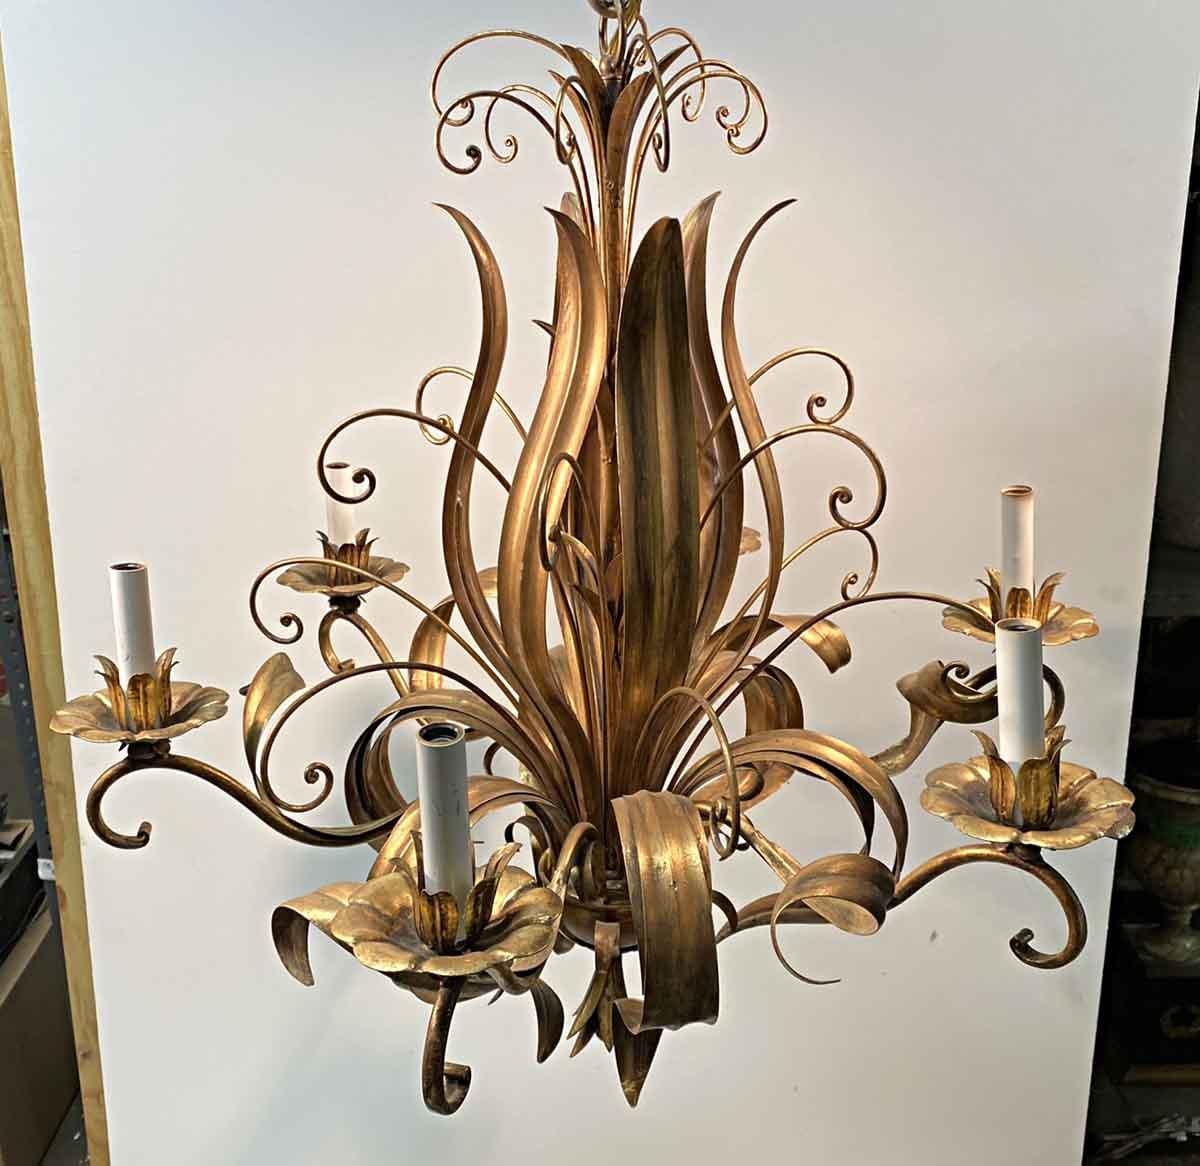 Gilt 2000s Rococo Italian Floral Chandelier with Gold Leaf Filigree, Six-Light